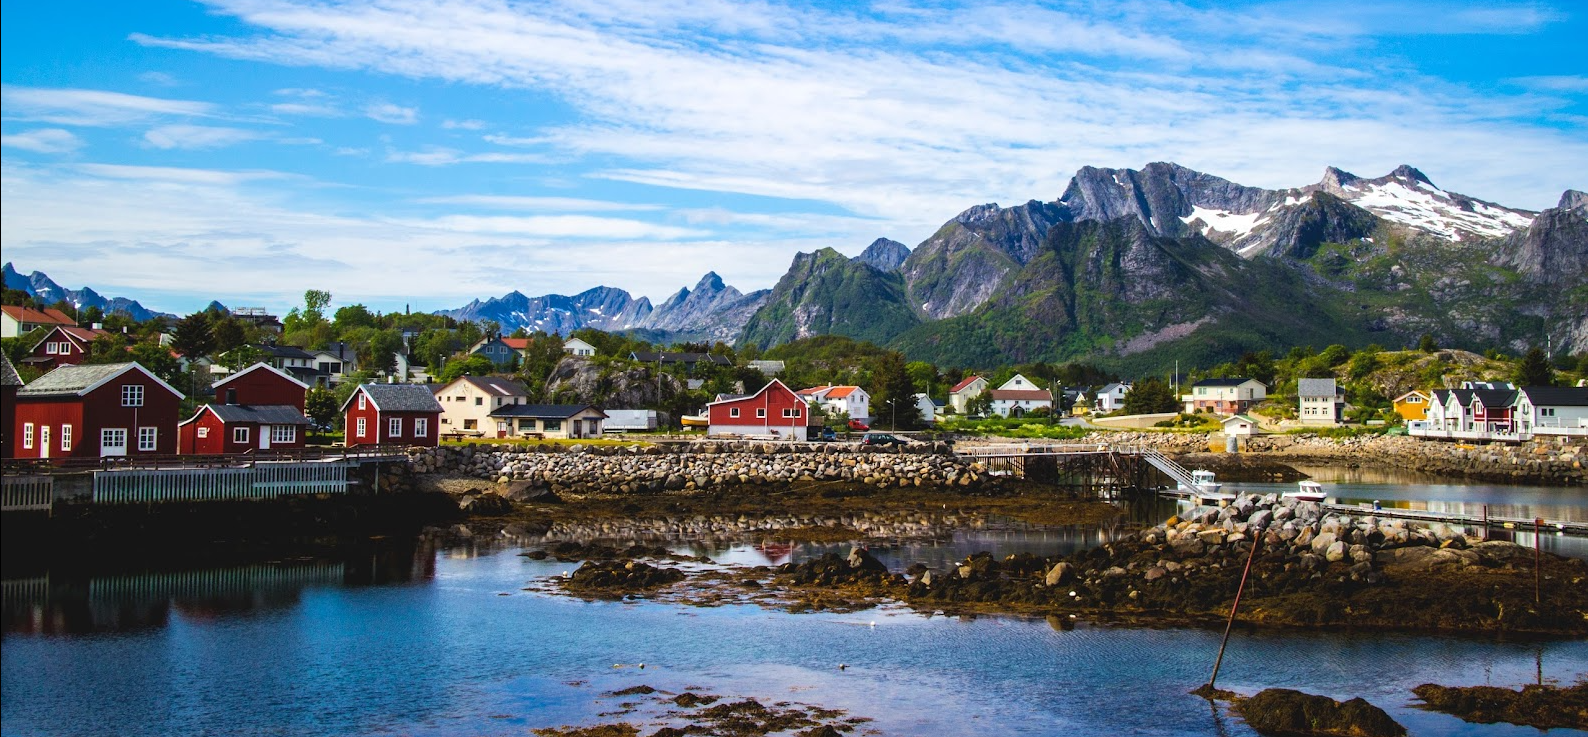 Sea in the foreground, red houses in the middle, and slightly snowy mountains in the background, taken on a sunny day in Kabelvåg from the molo.